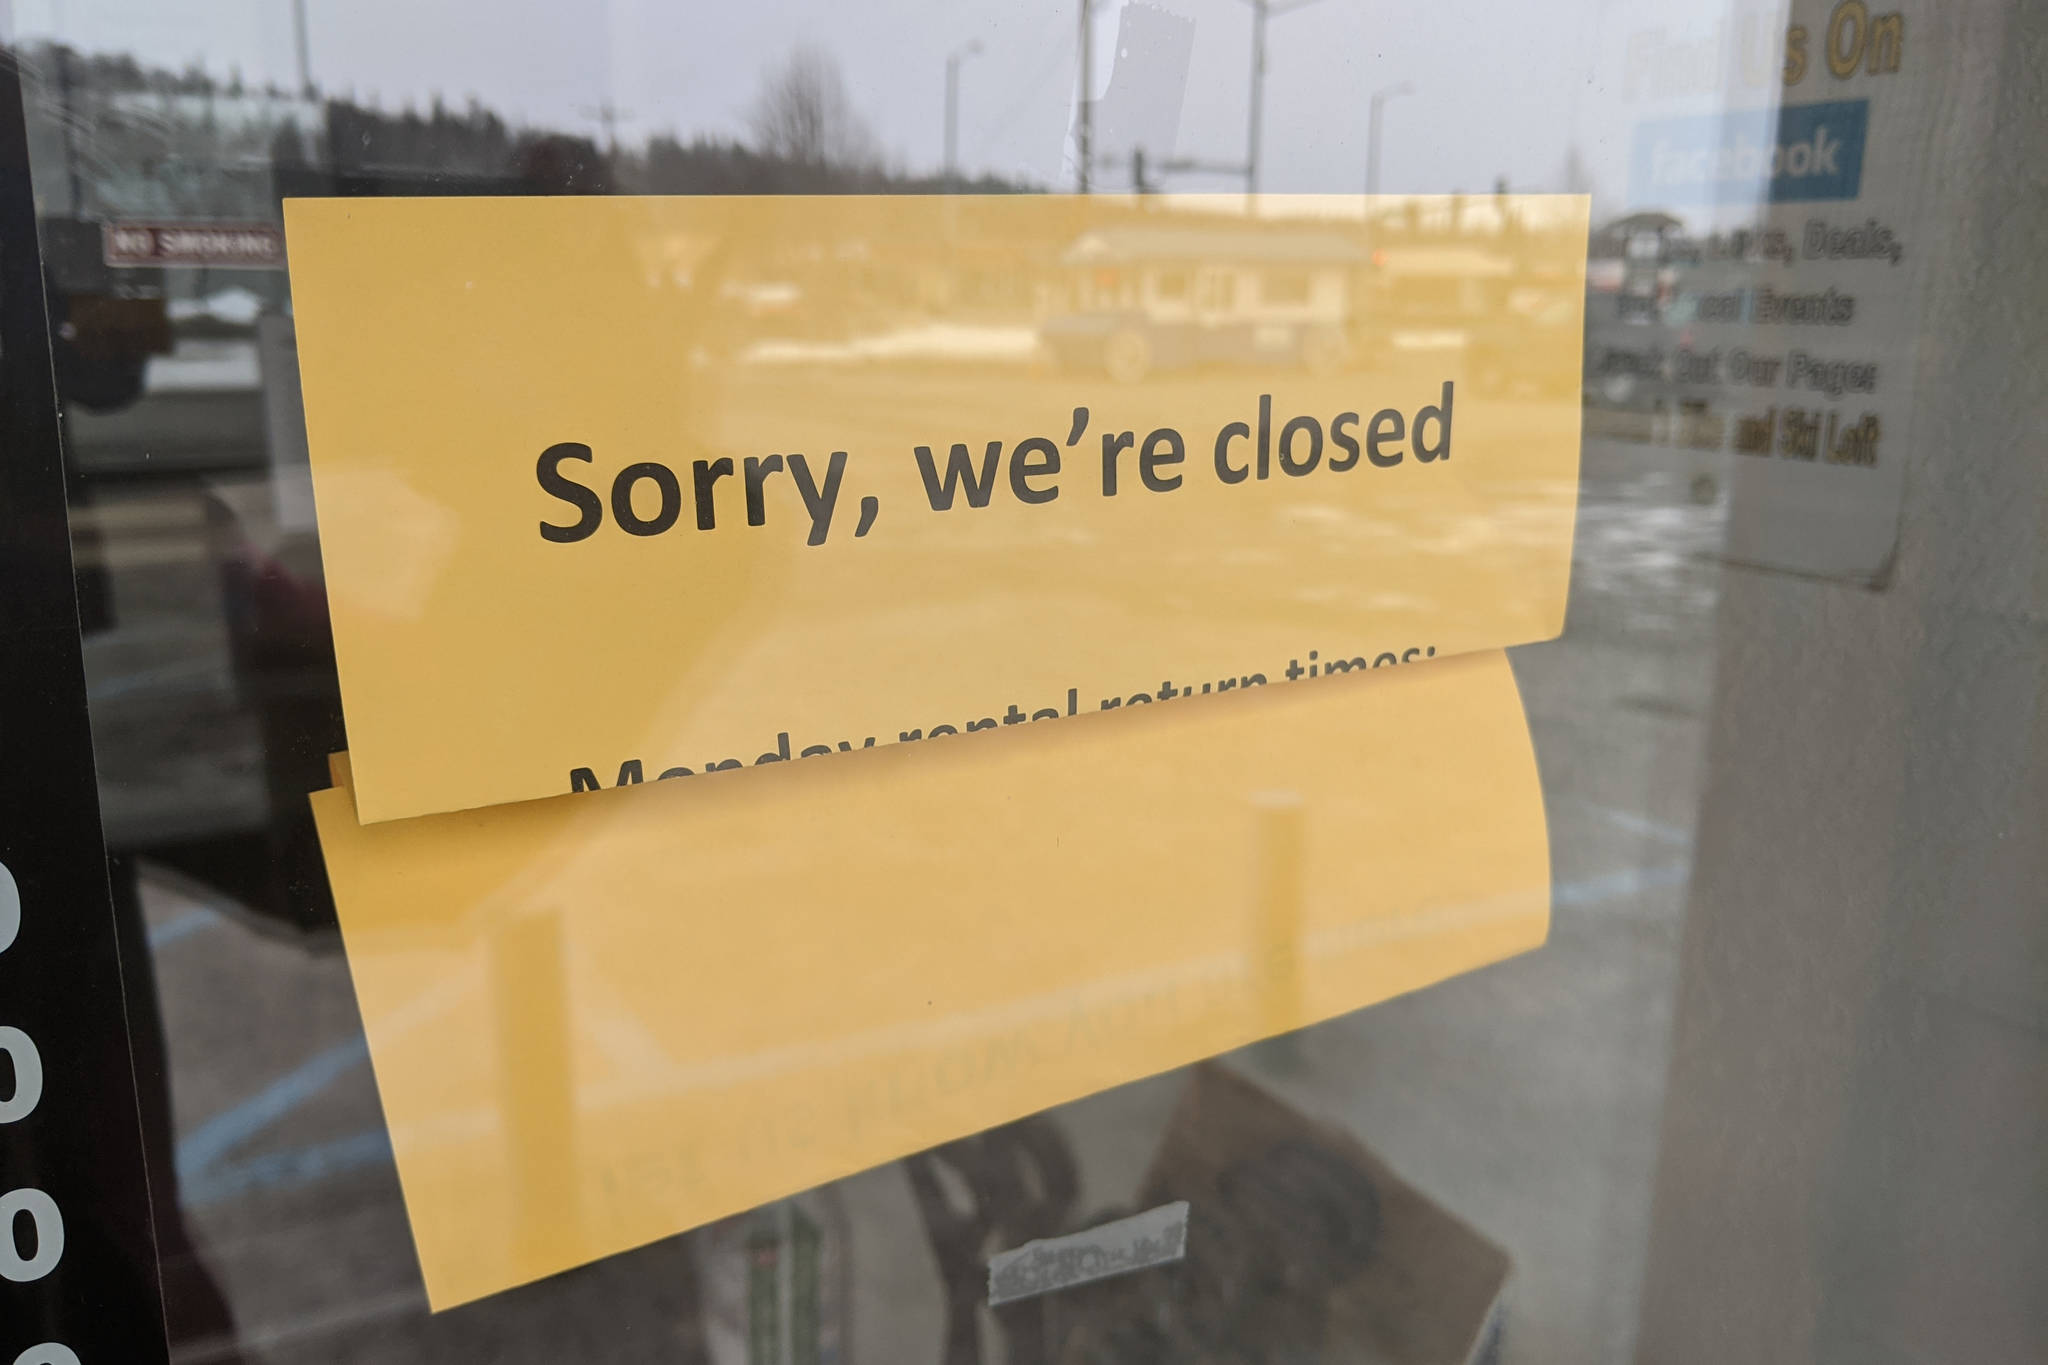 A sign announcing the closure of a Soldotna business due to the new coronavirus can be seen in this April 1 photo. (File)